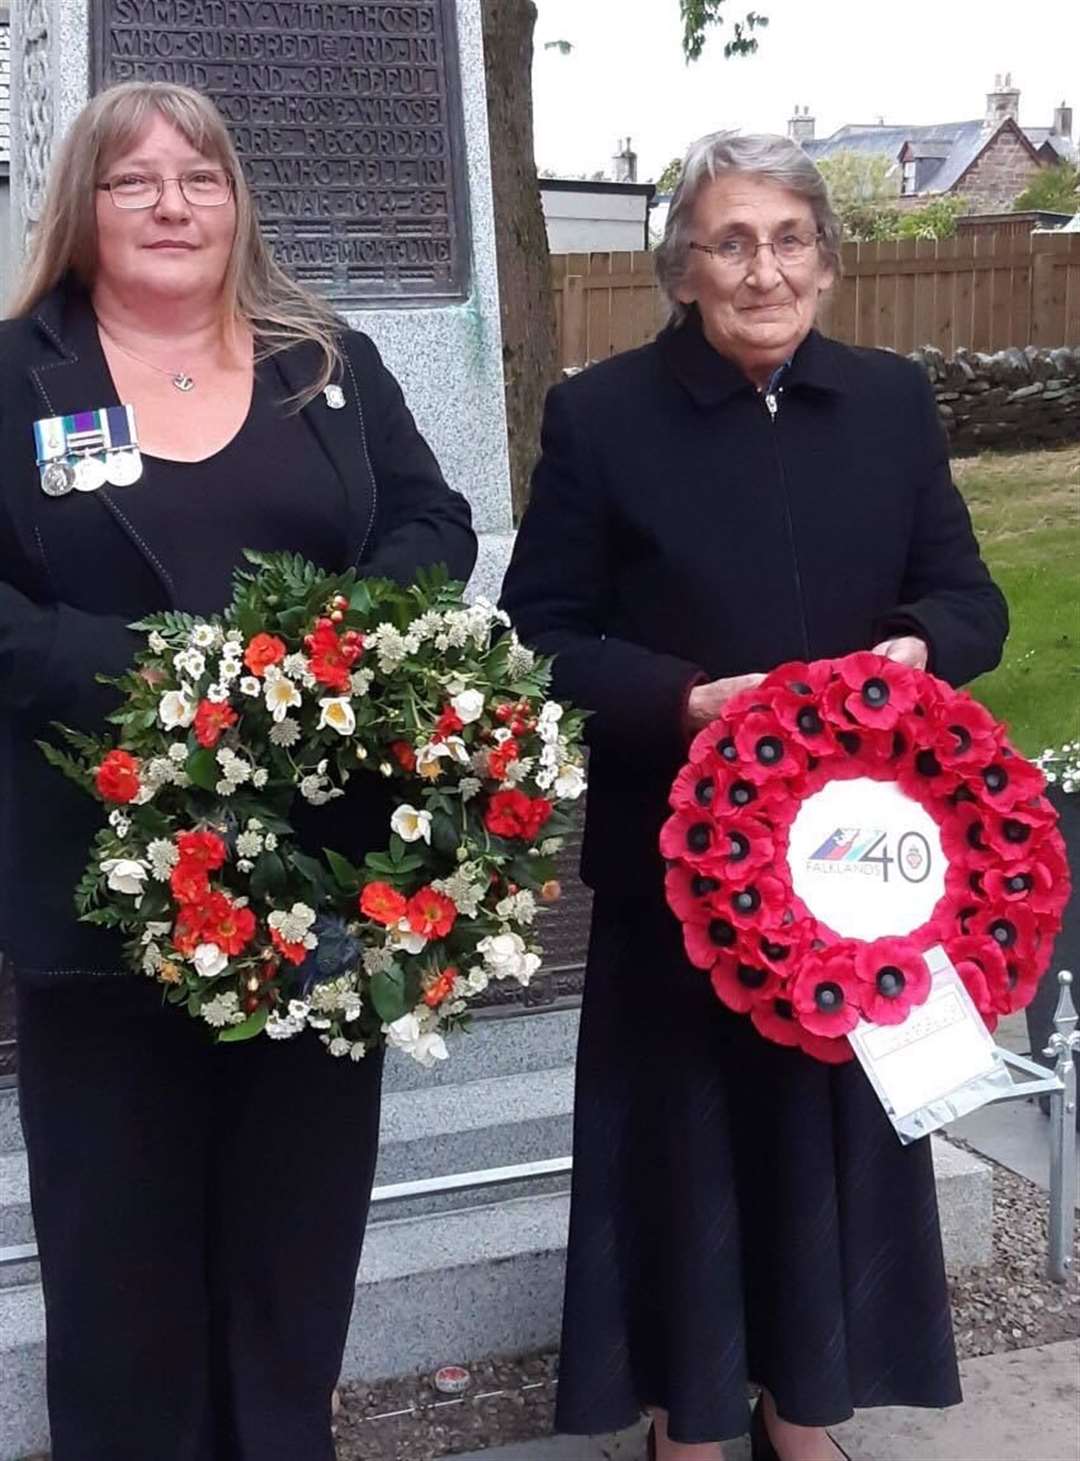 Wreathes were laid to mark the 40th anniversary of the end of the Falklands War.